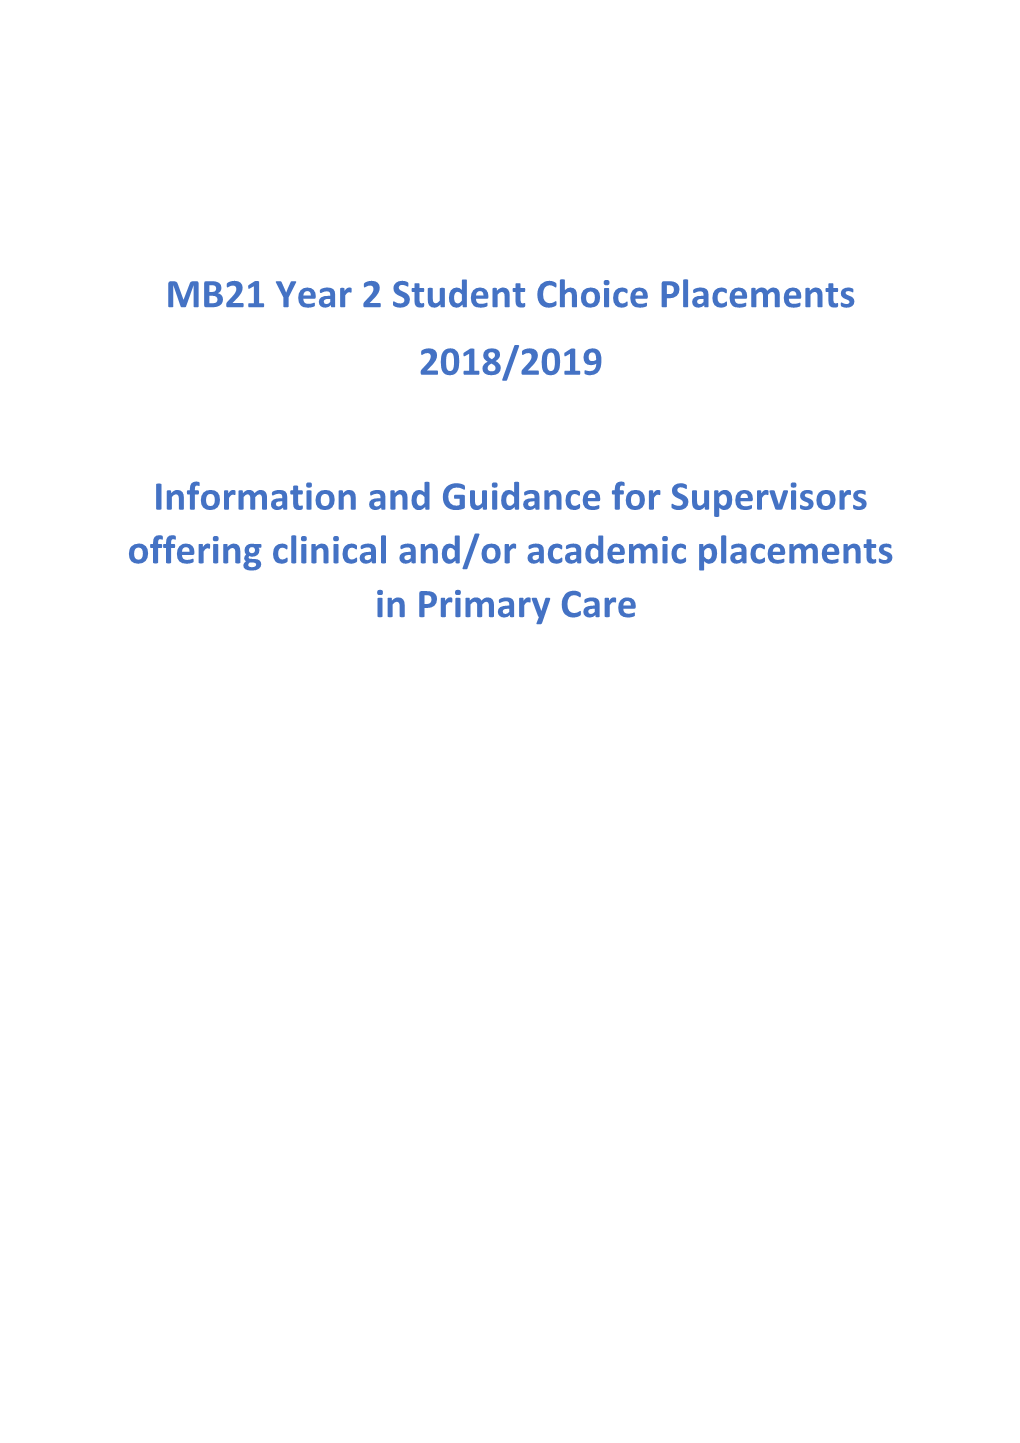 MB21 Year 2 Student Choice Placements